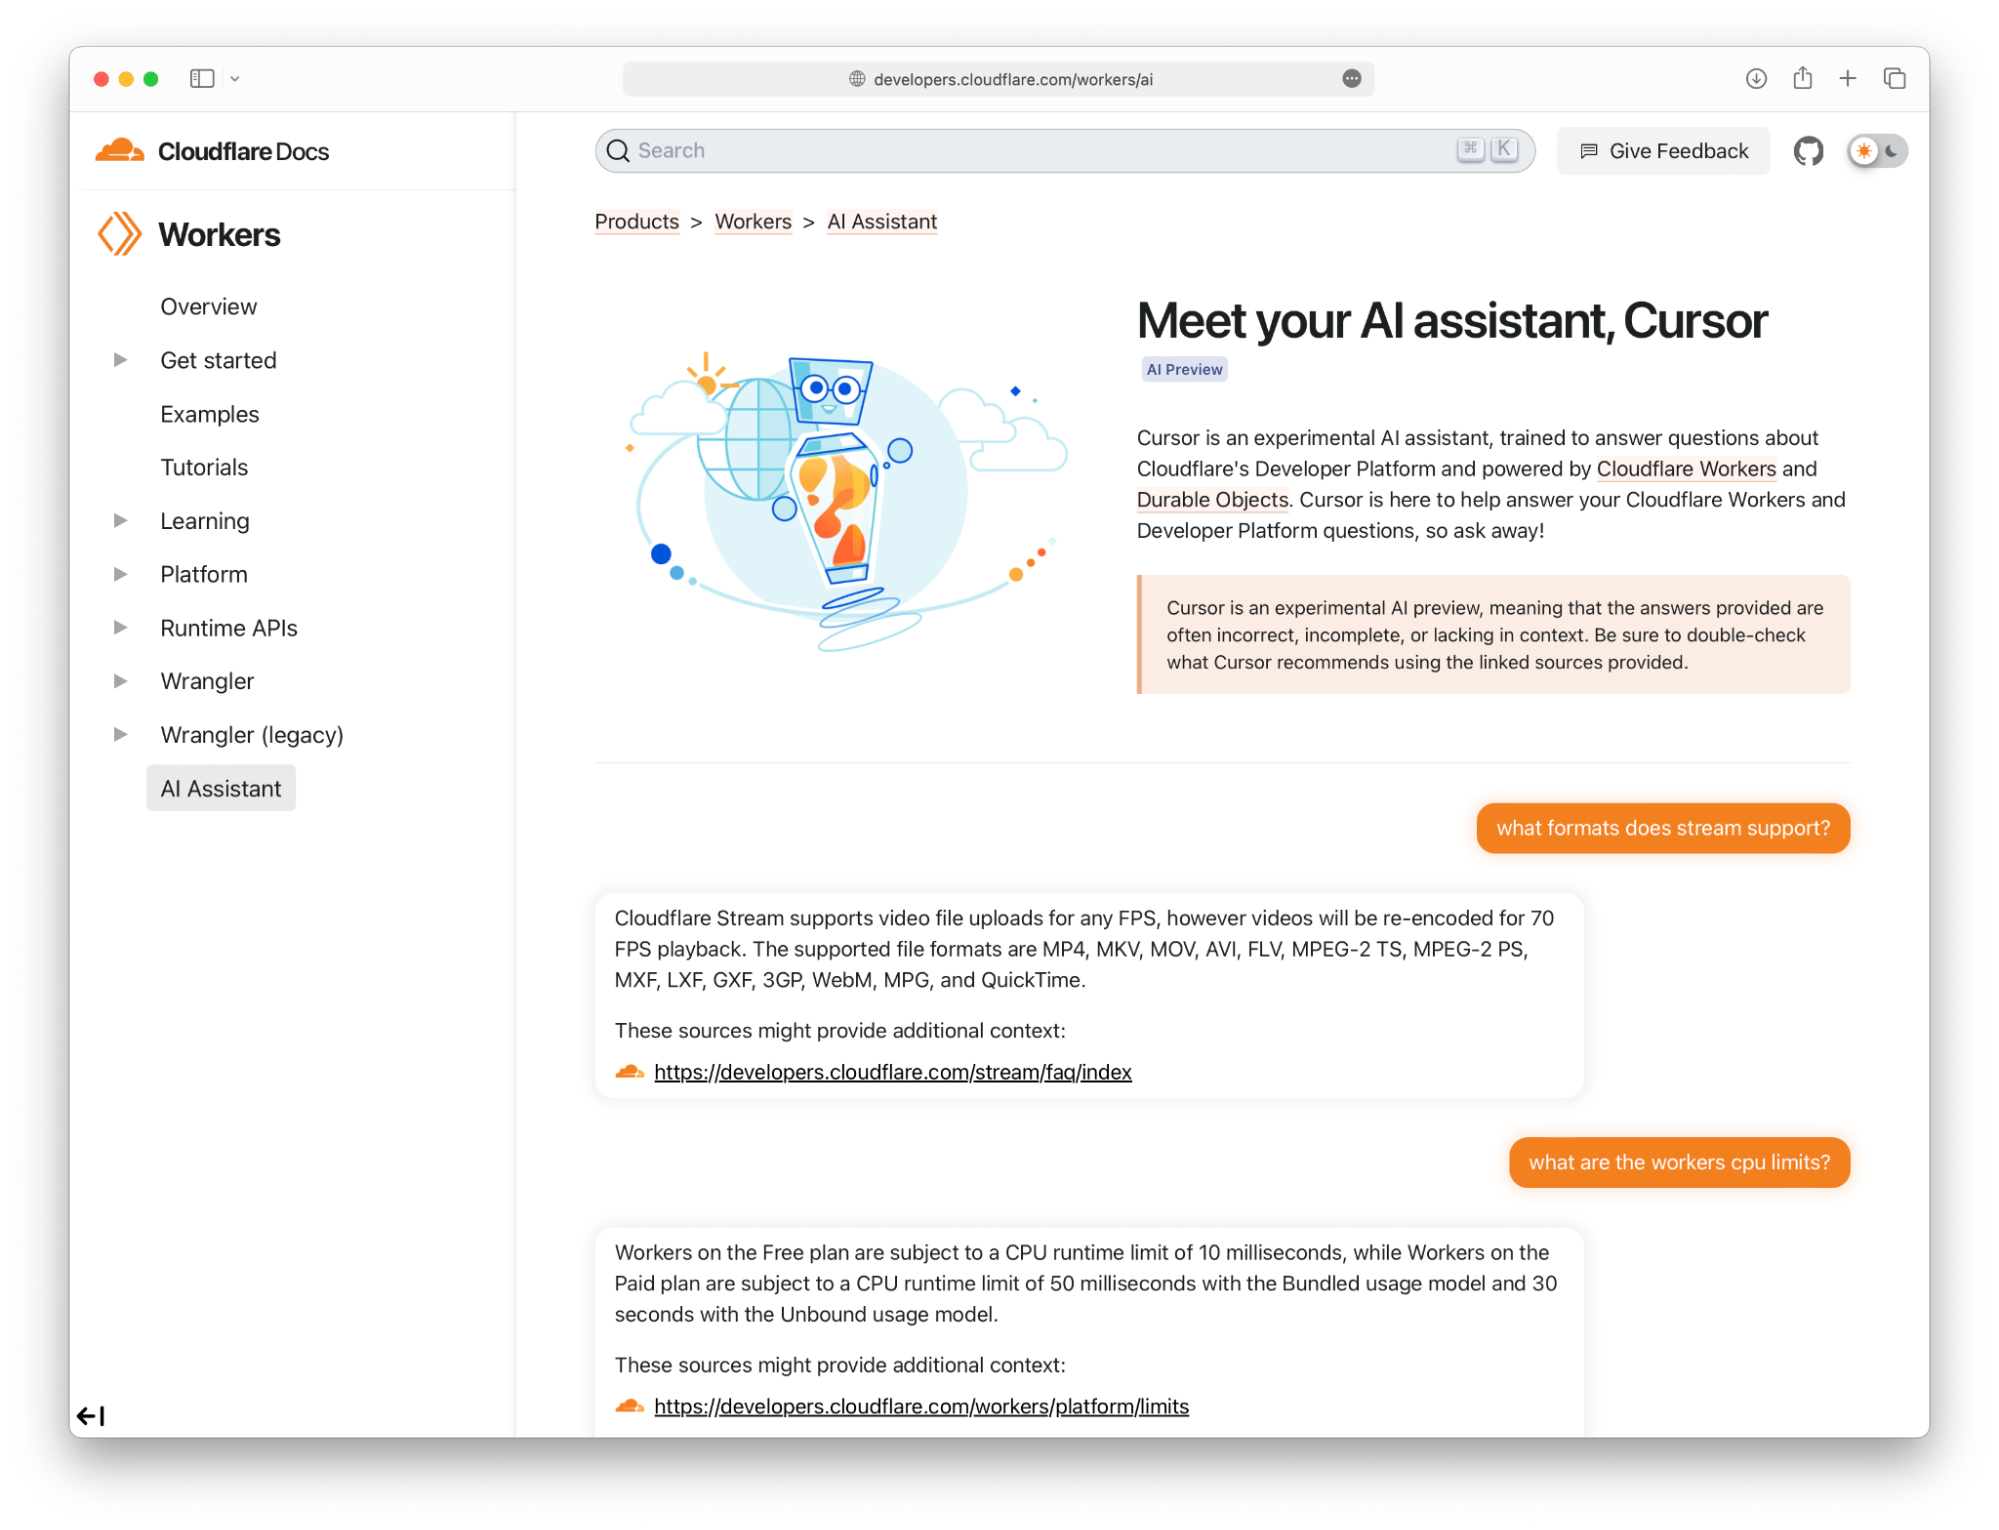 Introducing Cursor: the Cloudflare AI Assistant